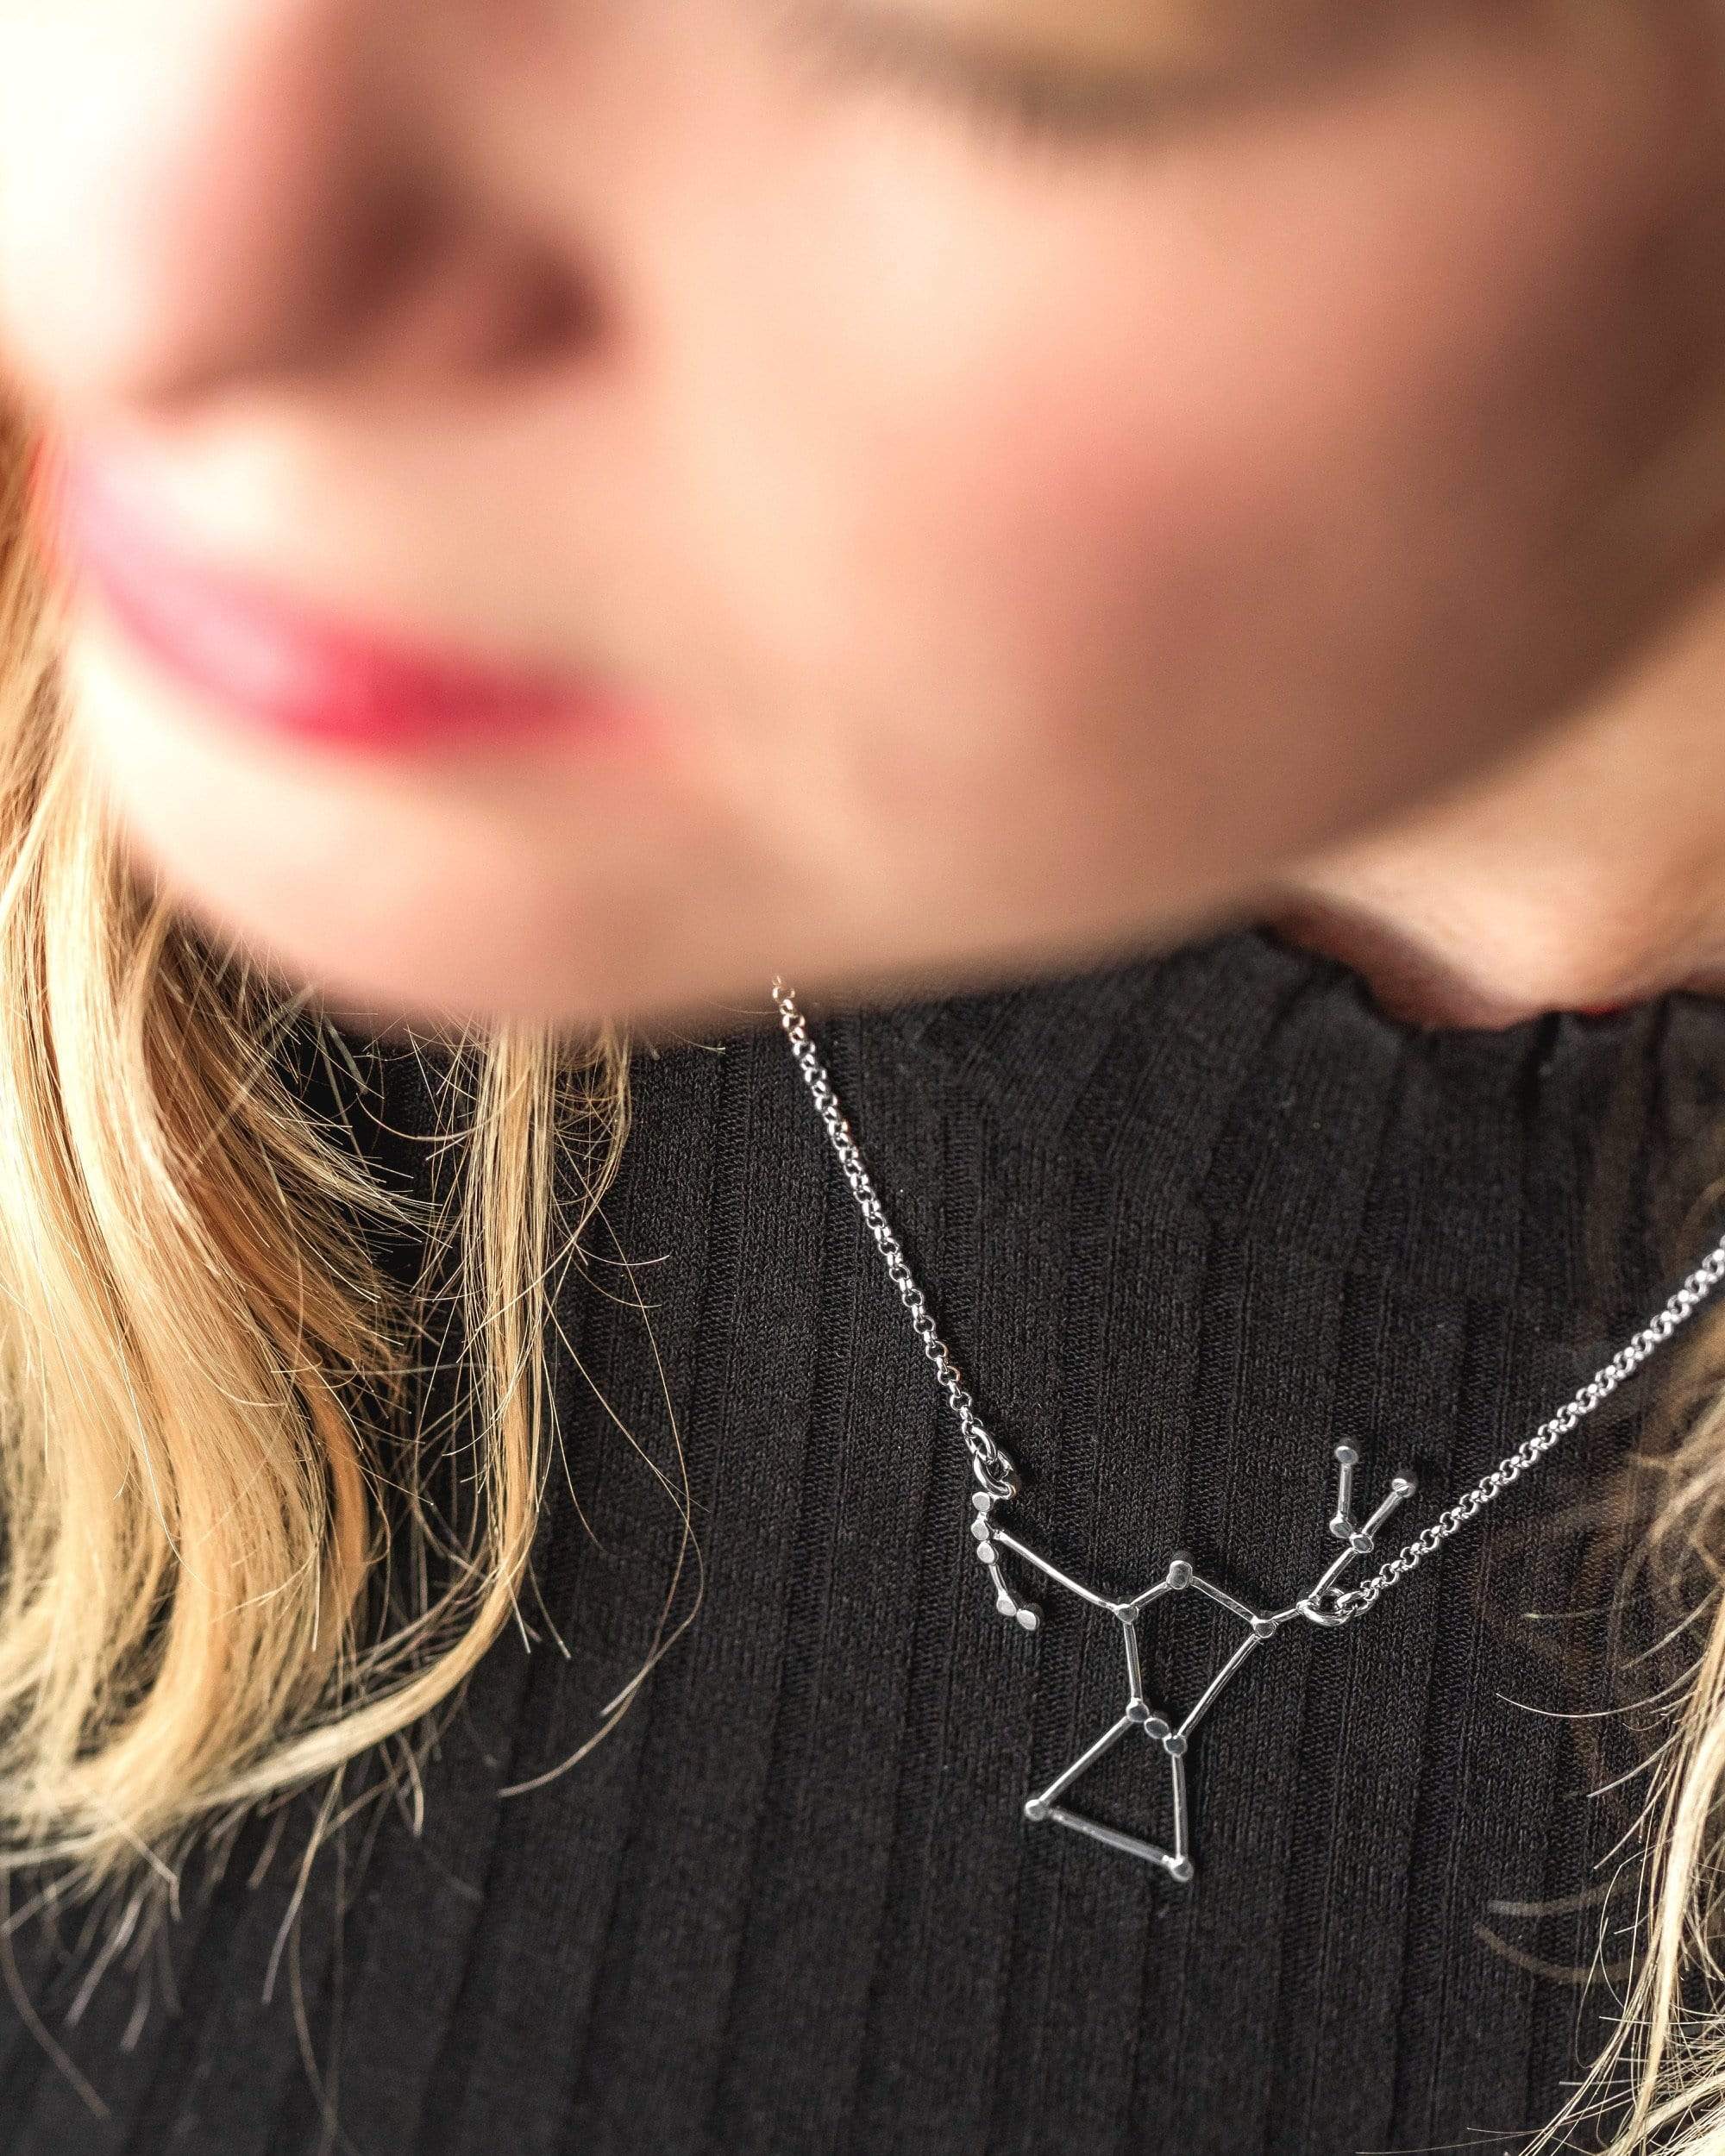 orion necklaces science jewelry sterling silver sciencejewelry1824 29439818432689